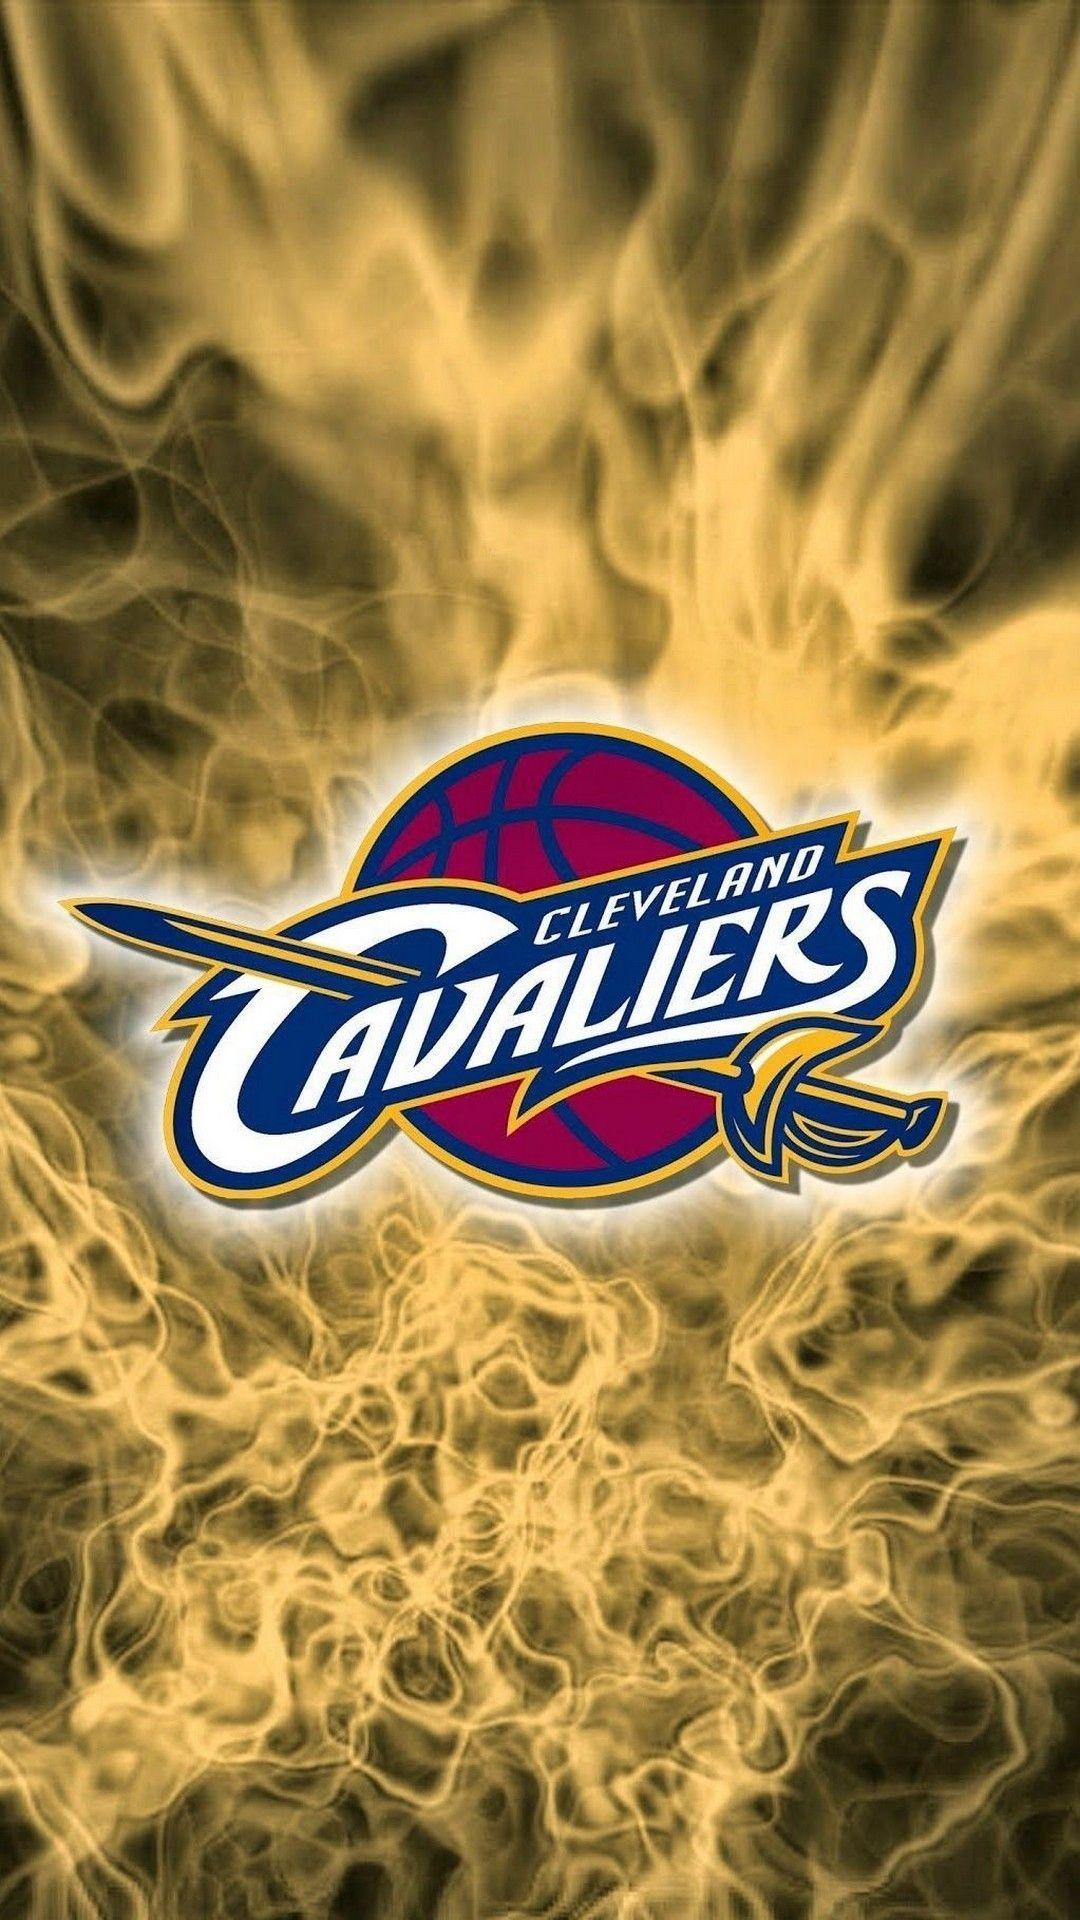 New Cleveland Cavaliers Wallpaper For Android FULL HD 1920×1080